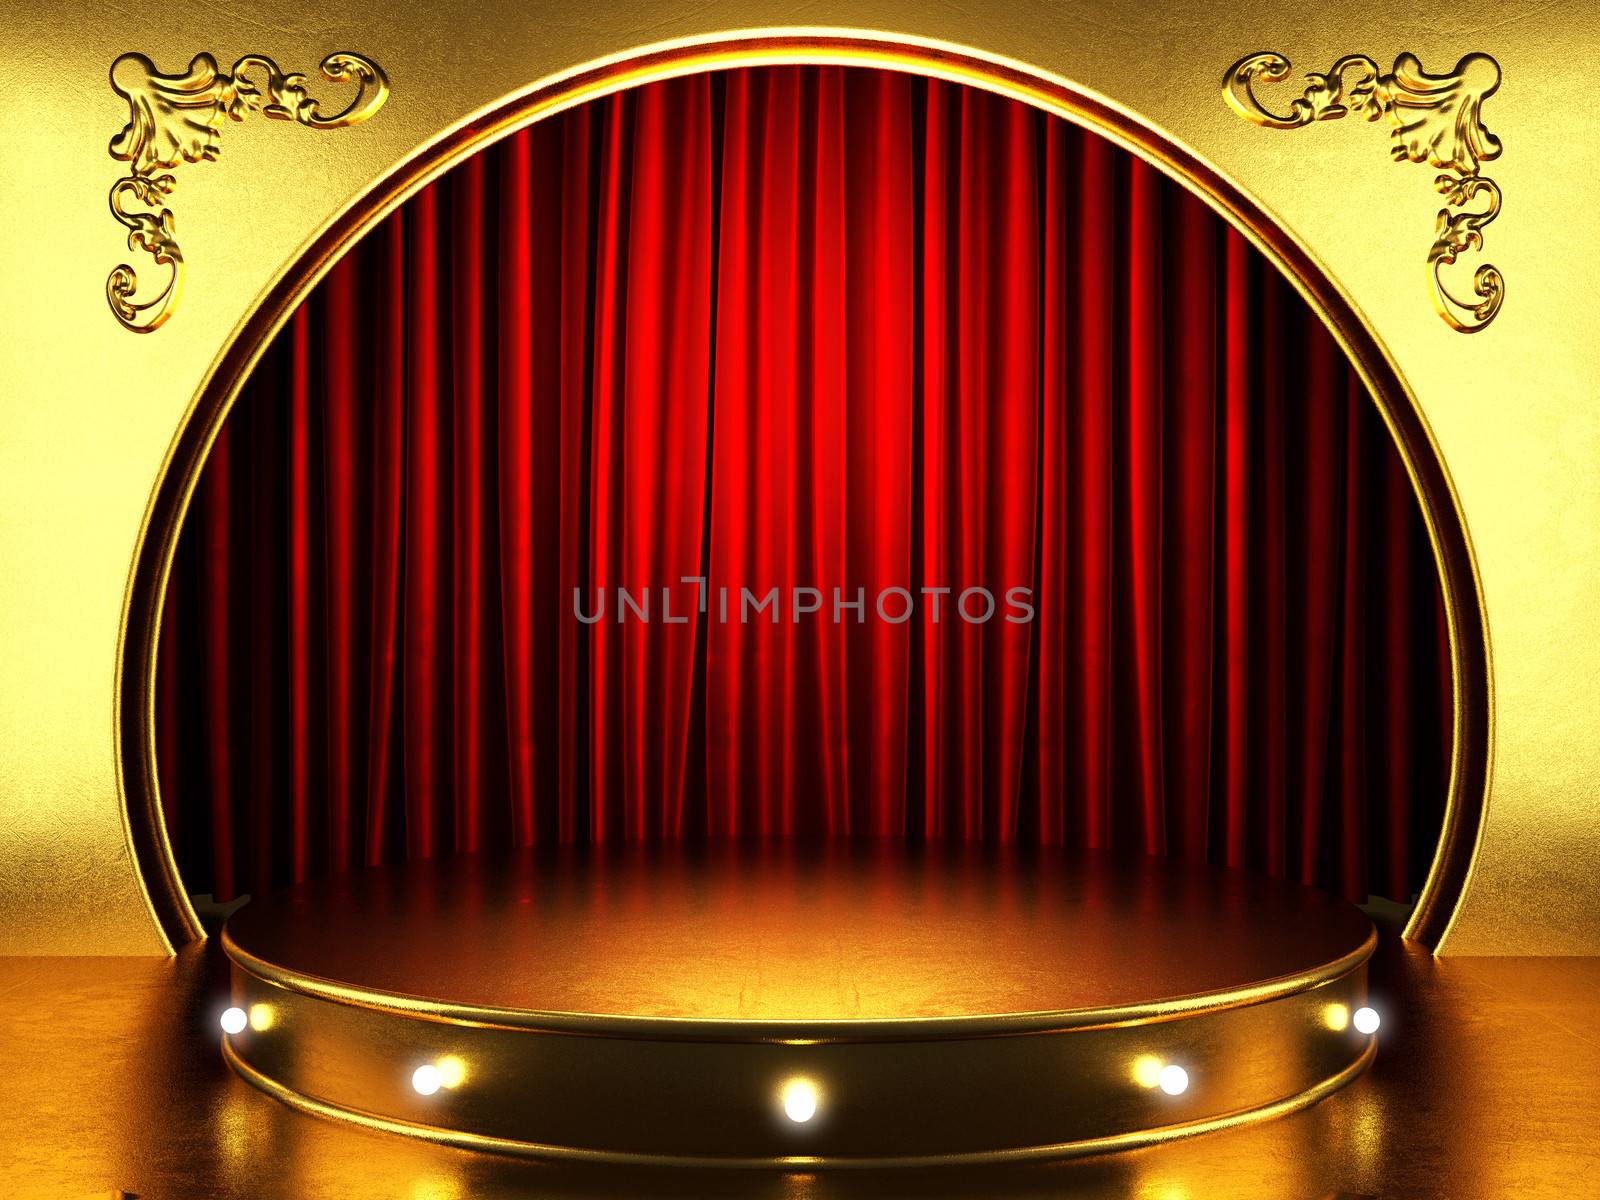 red fabrick curtain with gold on stage by videodoctor